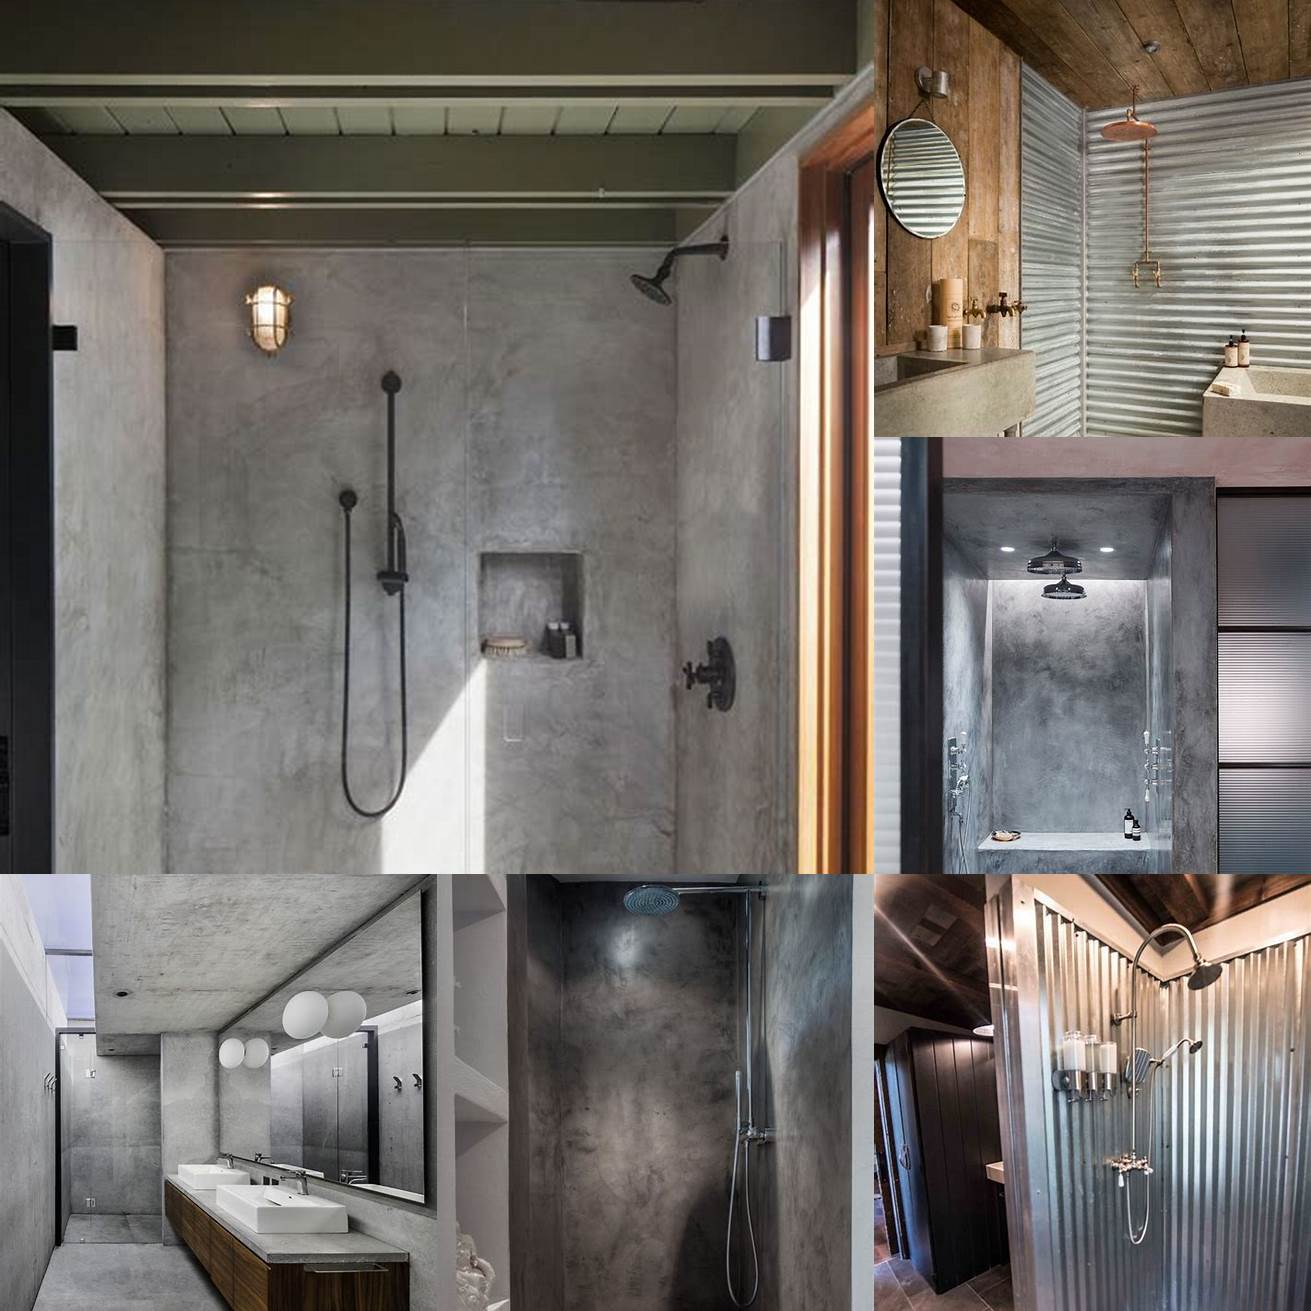 An industrial bathroom with a concrete floor and a metal shower partition